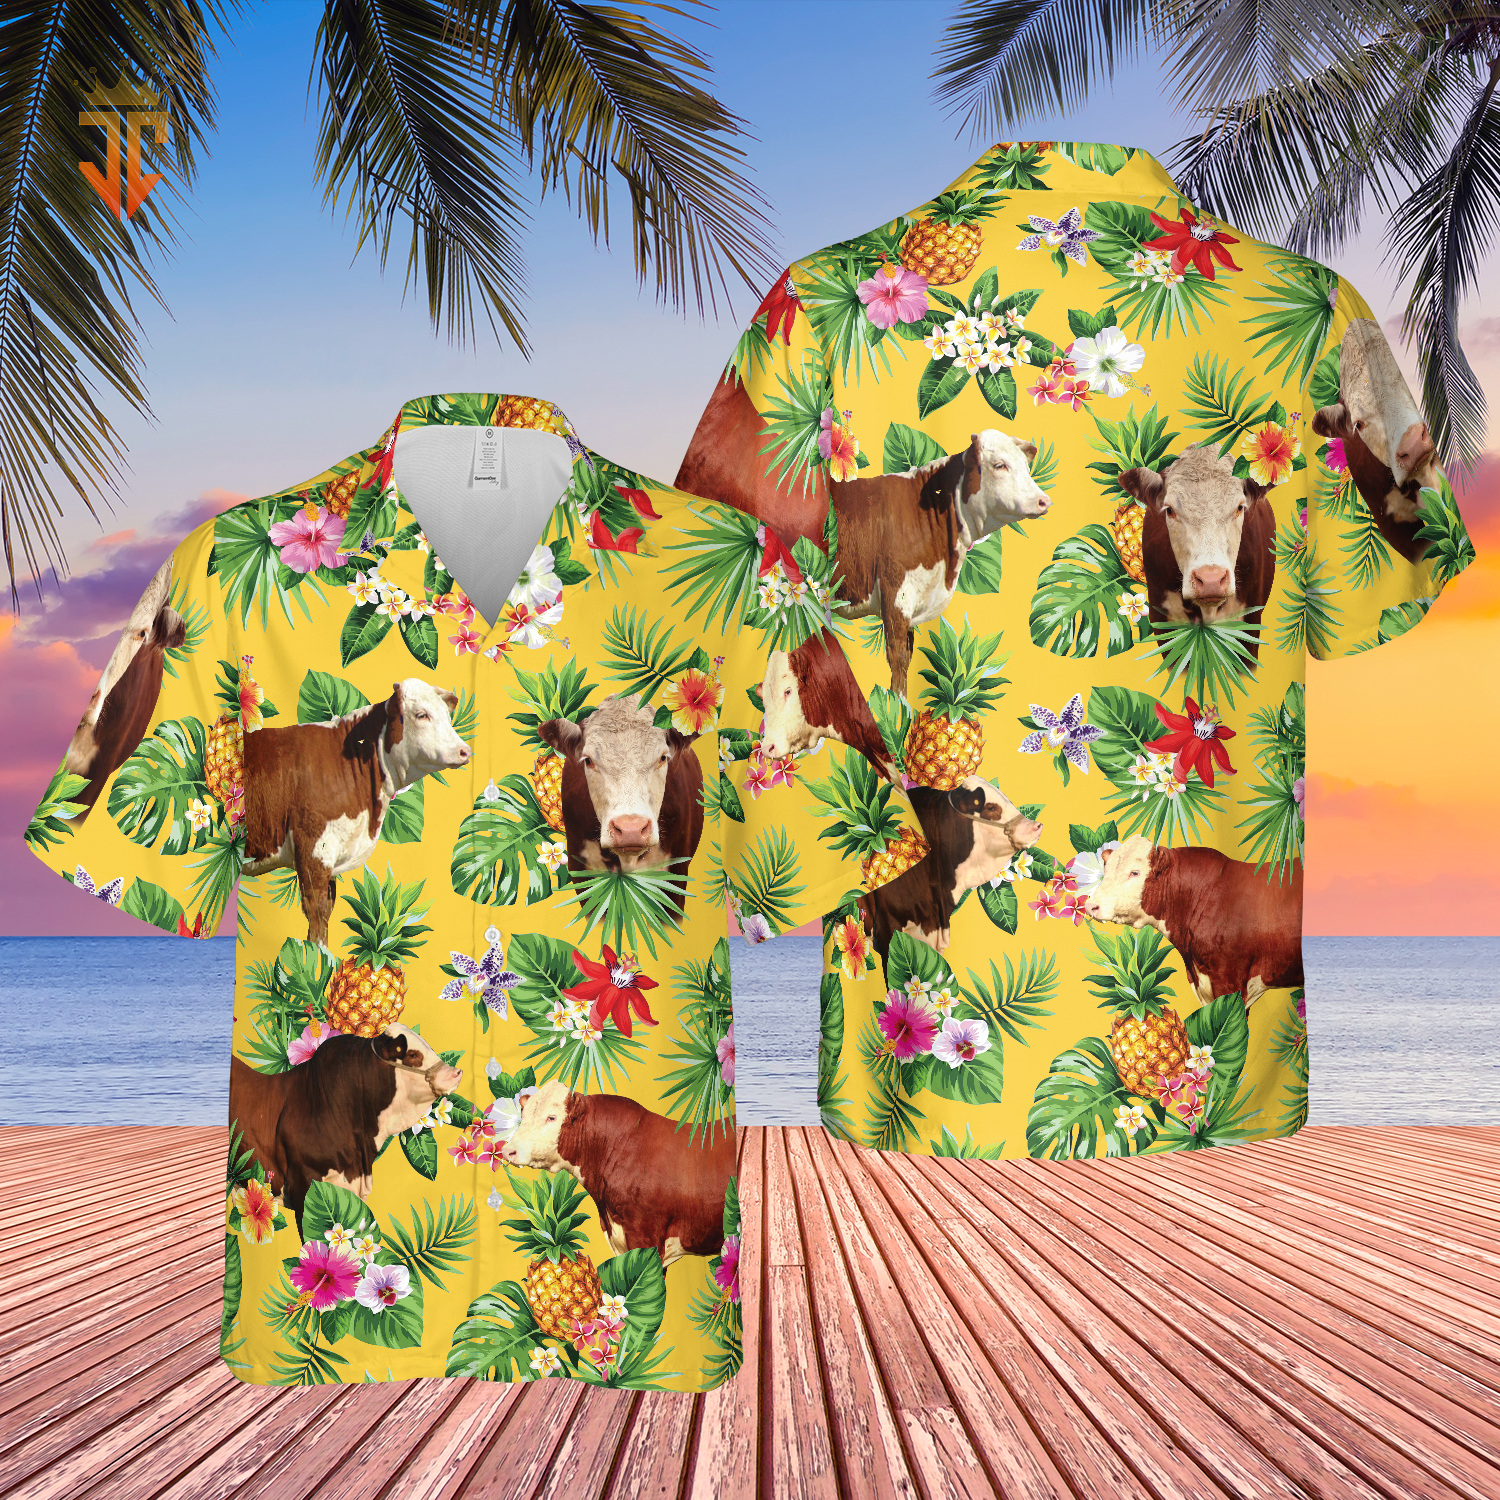 Personalized Name Hereford Cattle Pineapples All Over Printed 3D Hawaiian Shirt